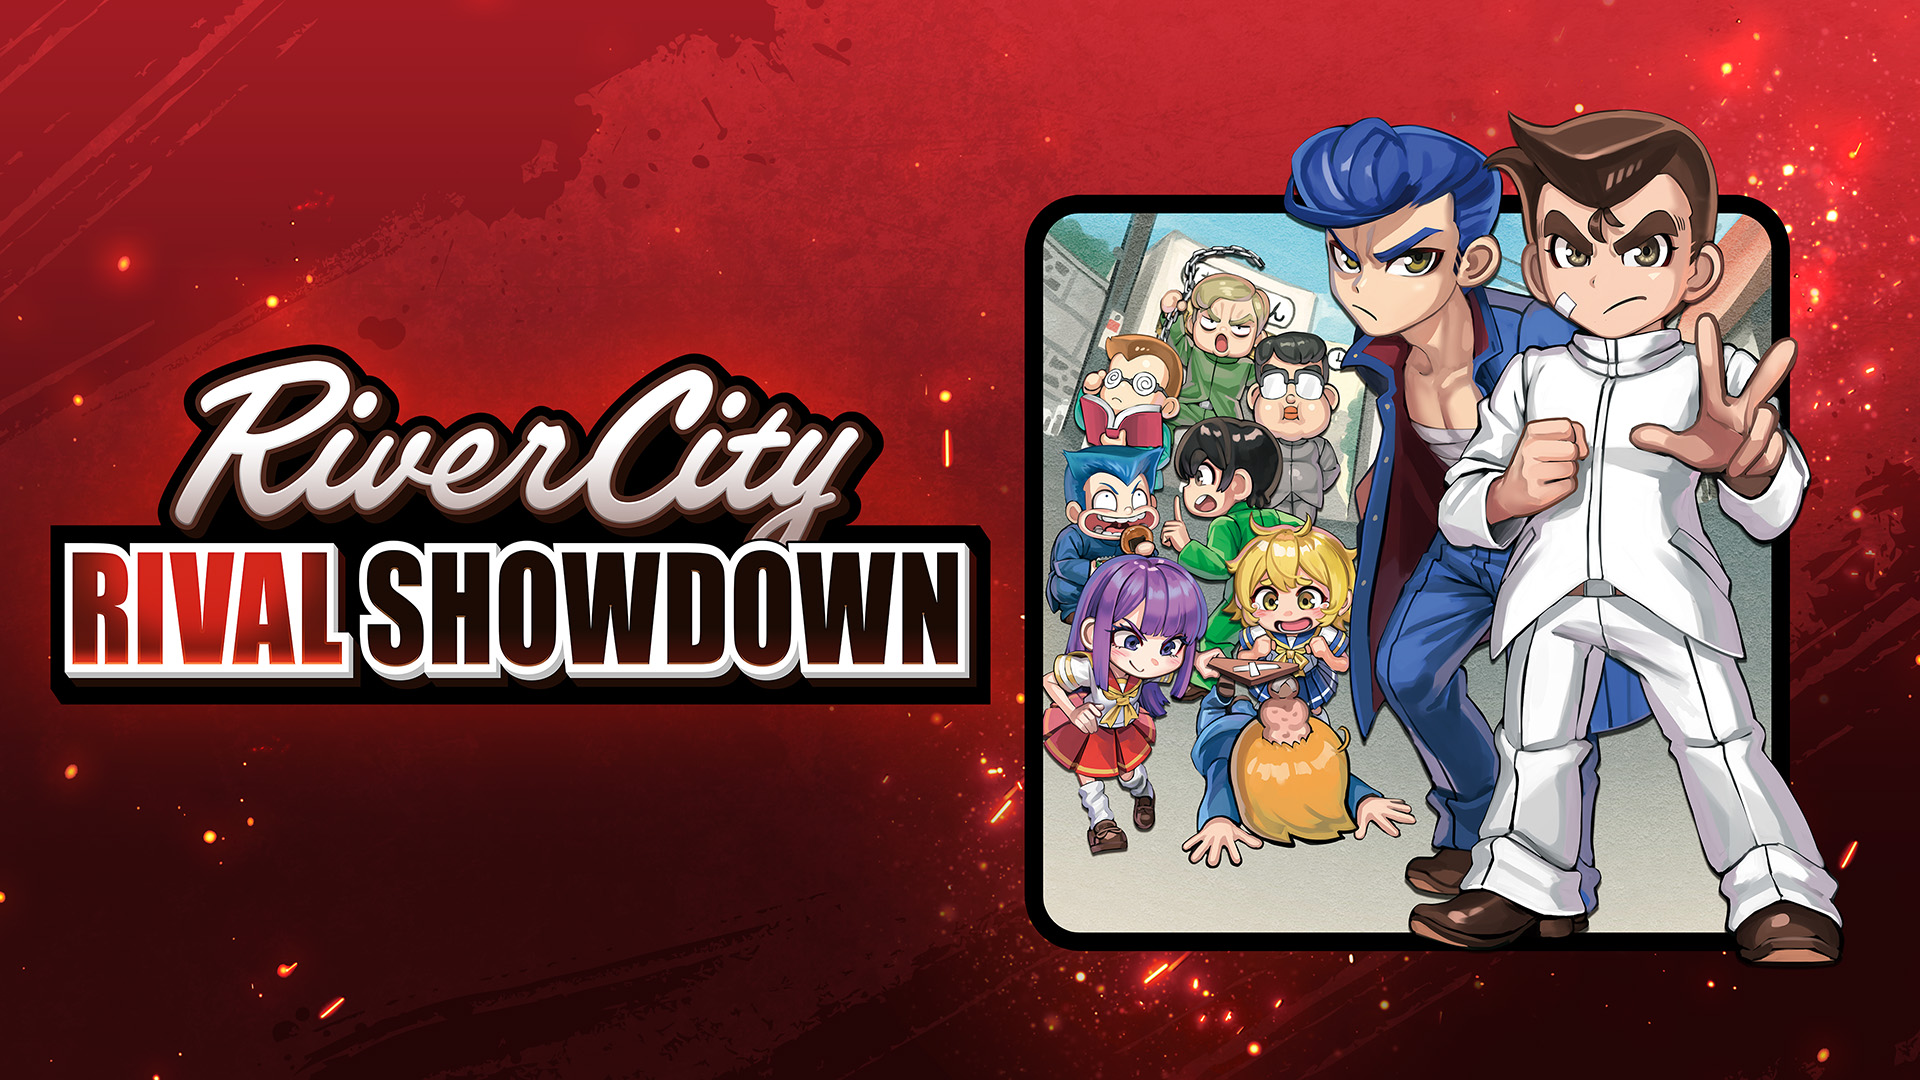 RIVER CITY: RIVAL SHOWDOWN REMAKE ARRIVING OCTOBER 12 FOR NINTENDO SWITCH, PLAYSTATION, AND PC